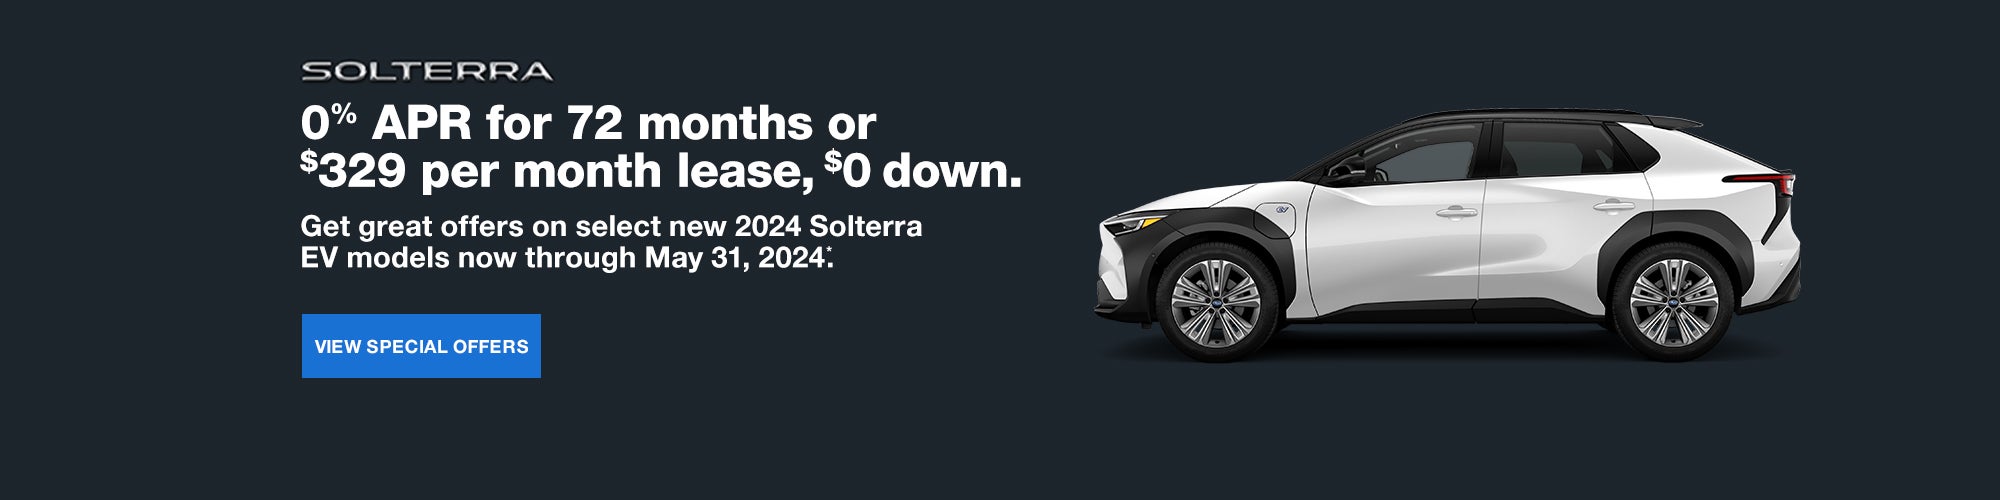 0% APR for 72 Months or $329 per month lease | Solterra